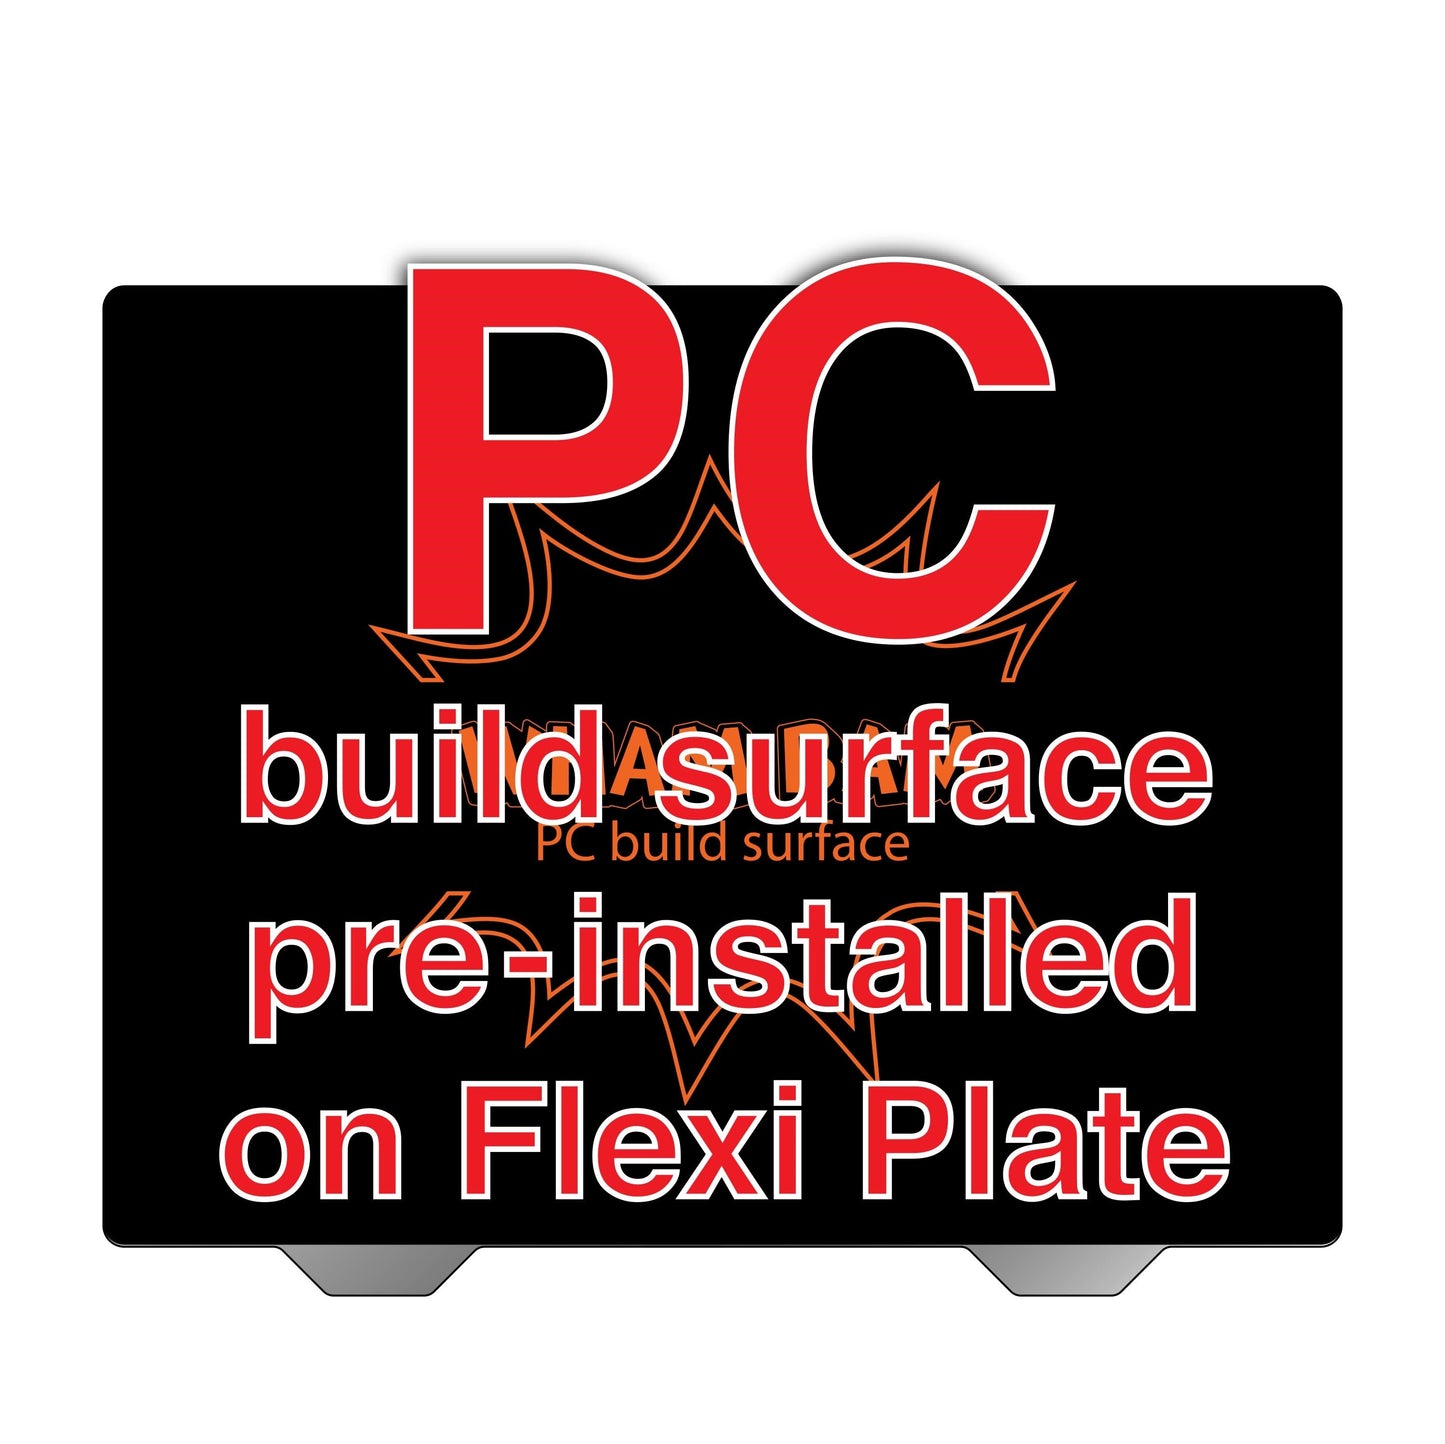 Flexi Plate with Pre-Installed PC Build Surface (Classic Black) - 340 x 325  - Railcore II 300ZL